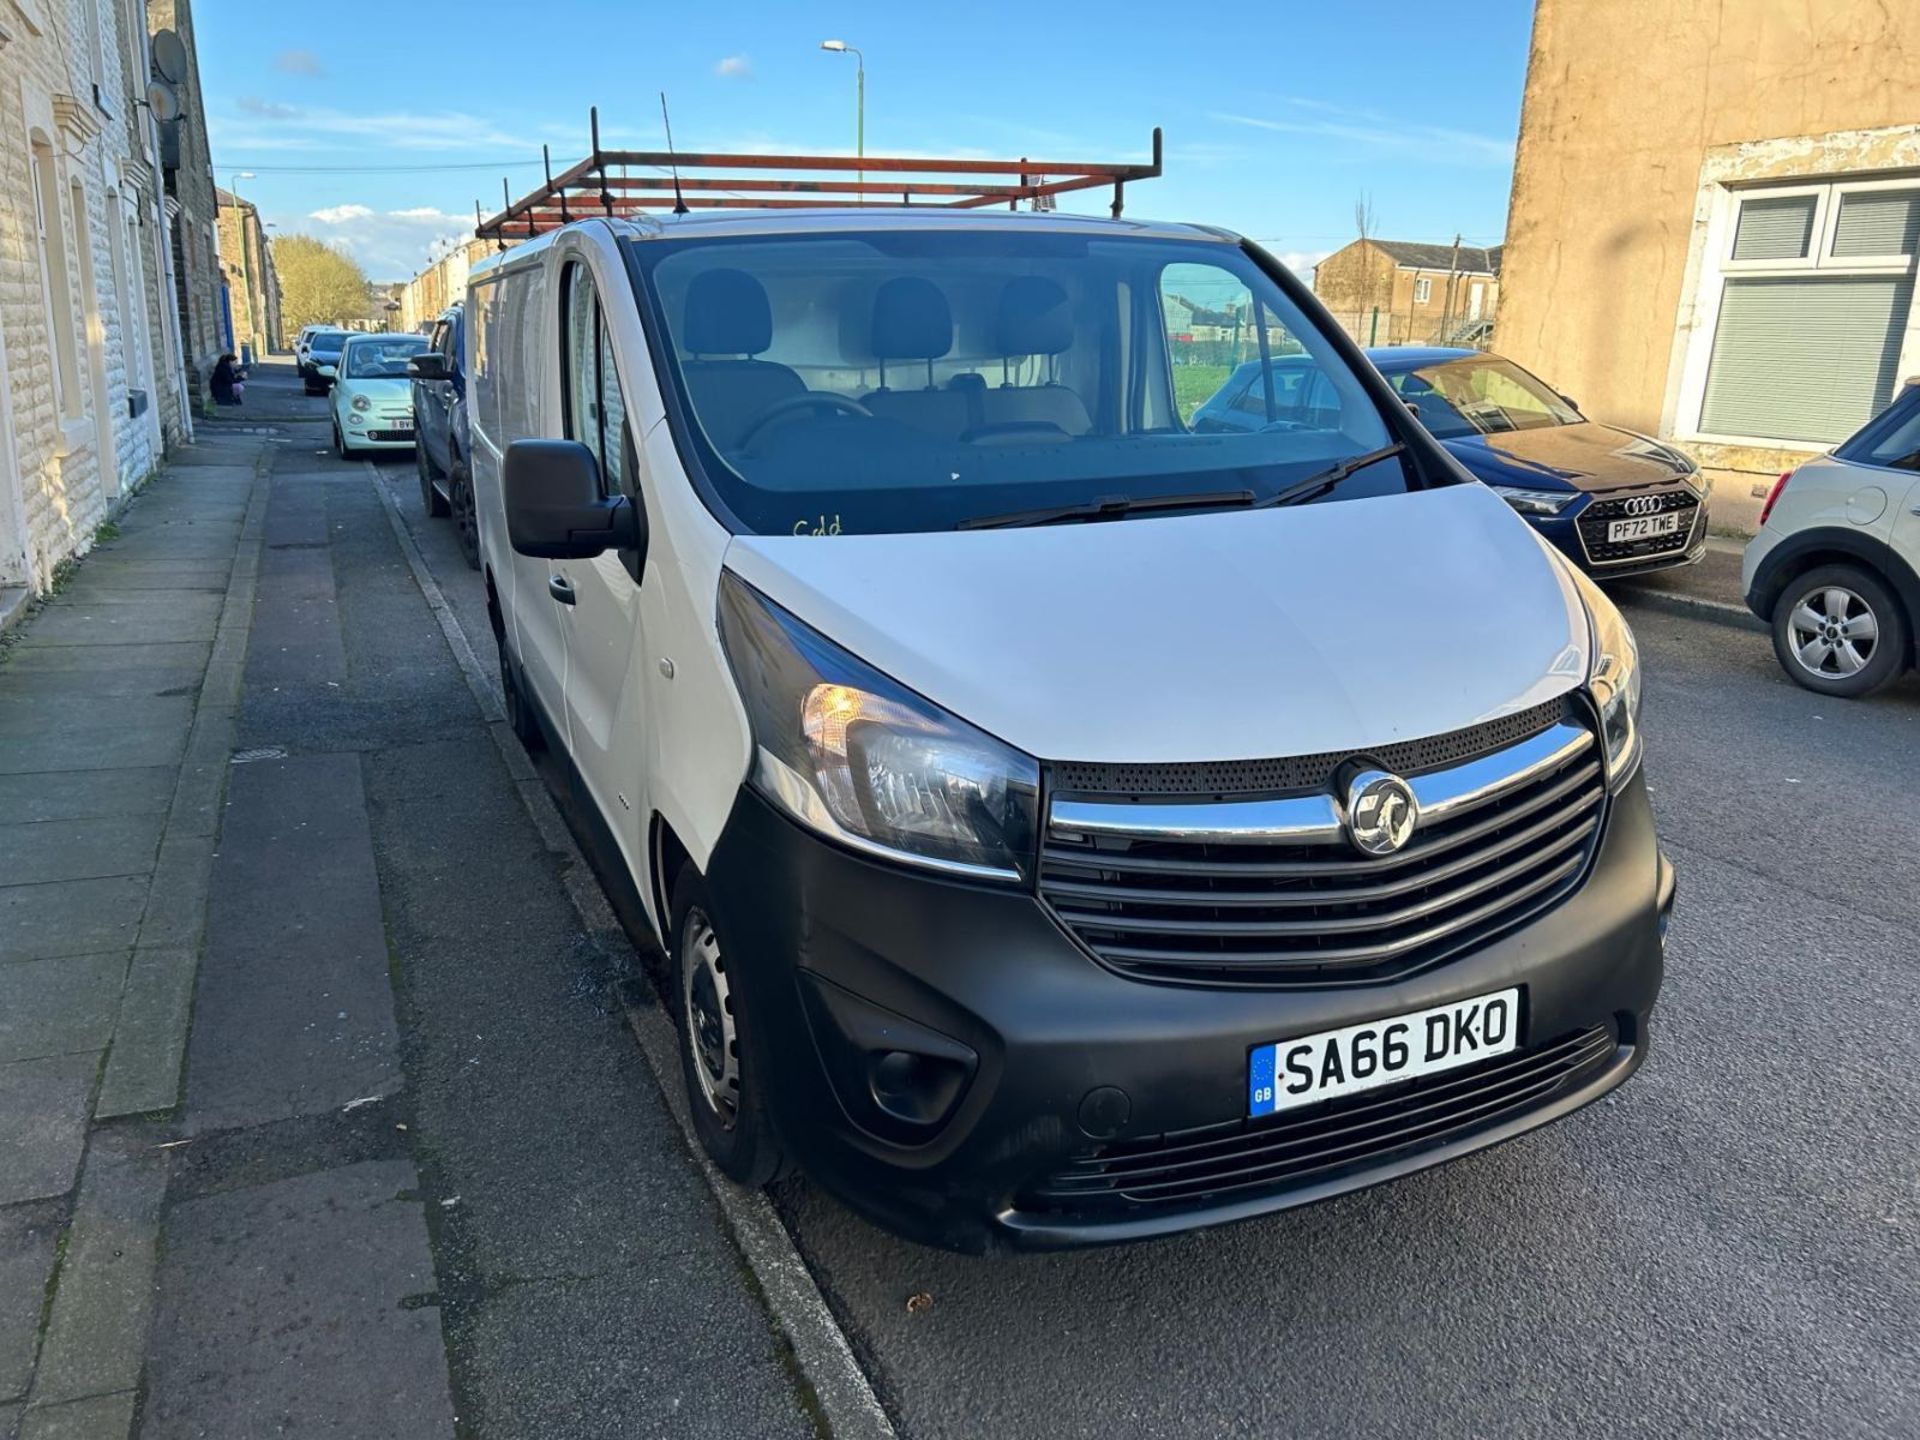 2016 VAUXHALL VIVARO SPORTIVE - ONLY 58K MILES - HPI CLEAR - READY FOR WORK! - Image 11 of 13